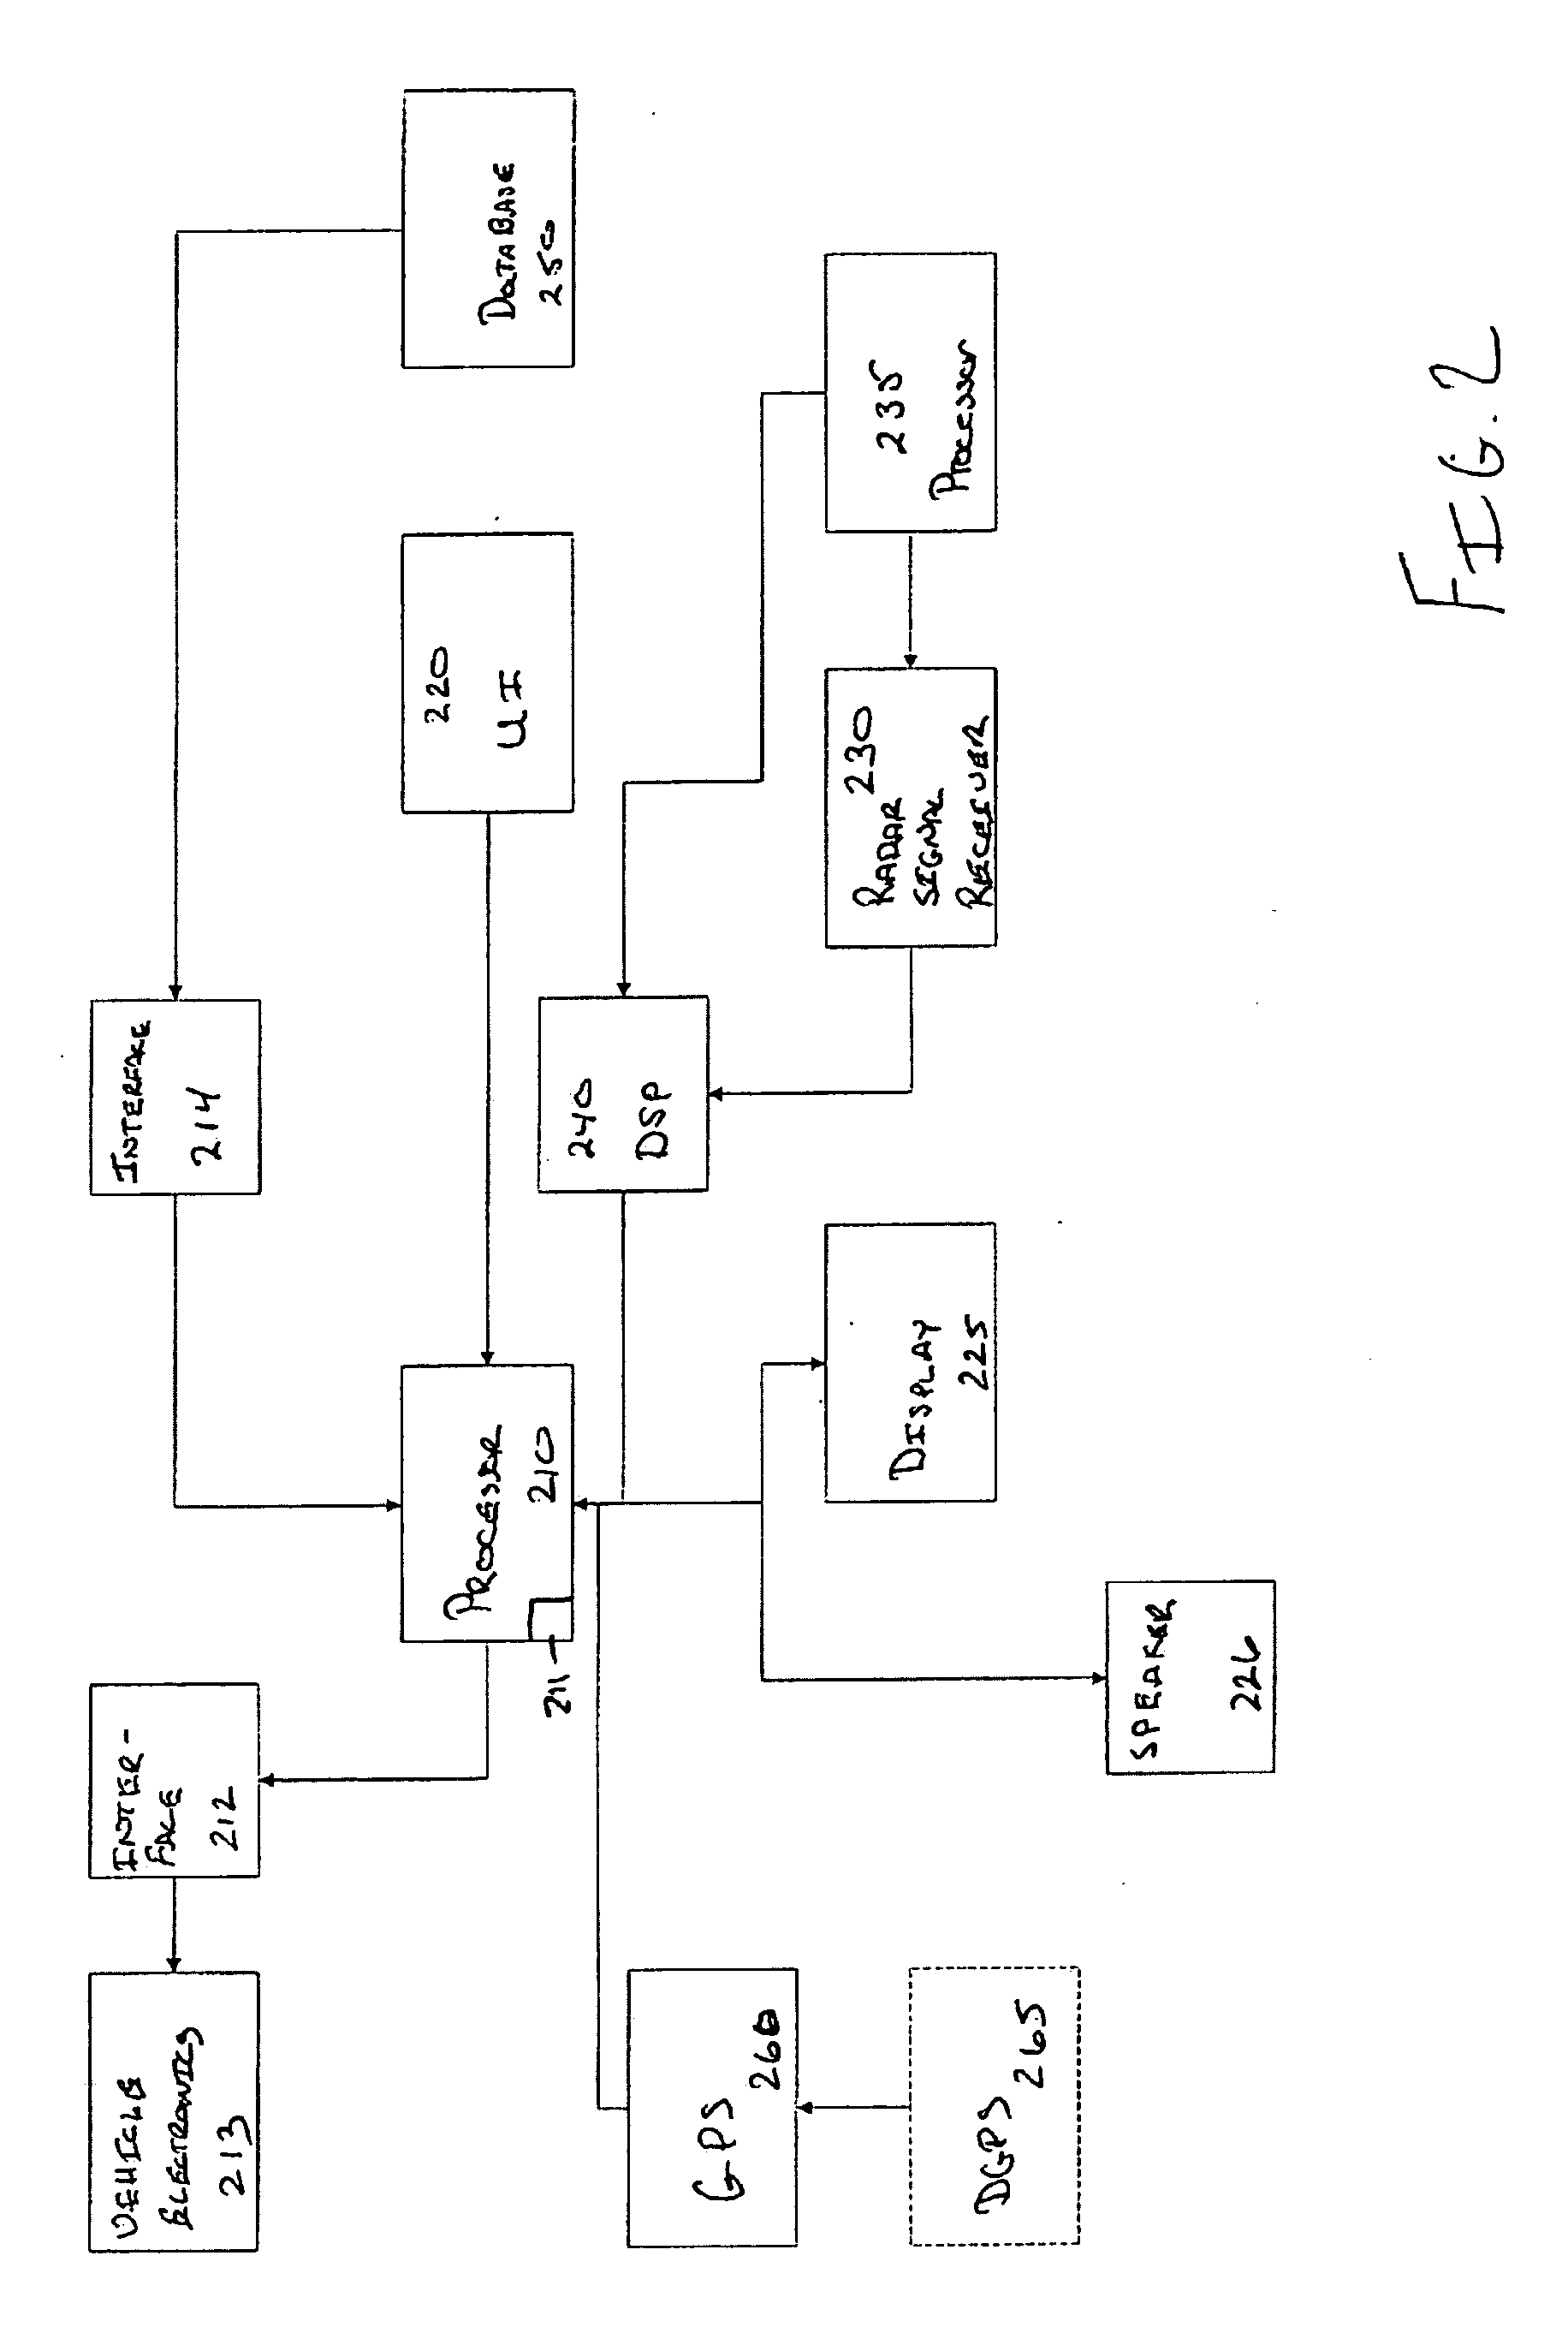 Radar detector with signal source location determination and filtering